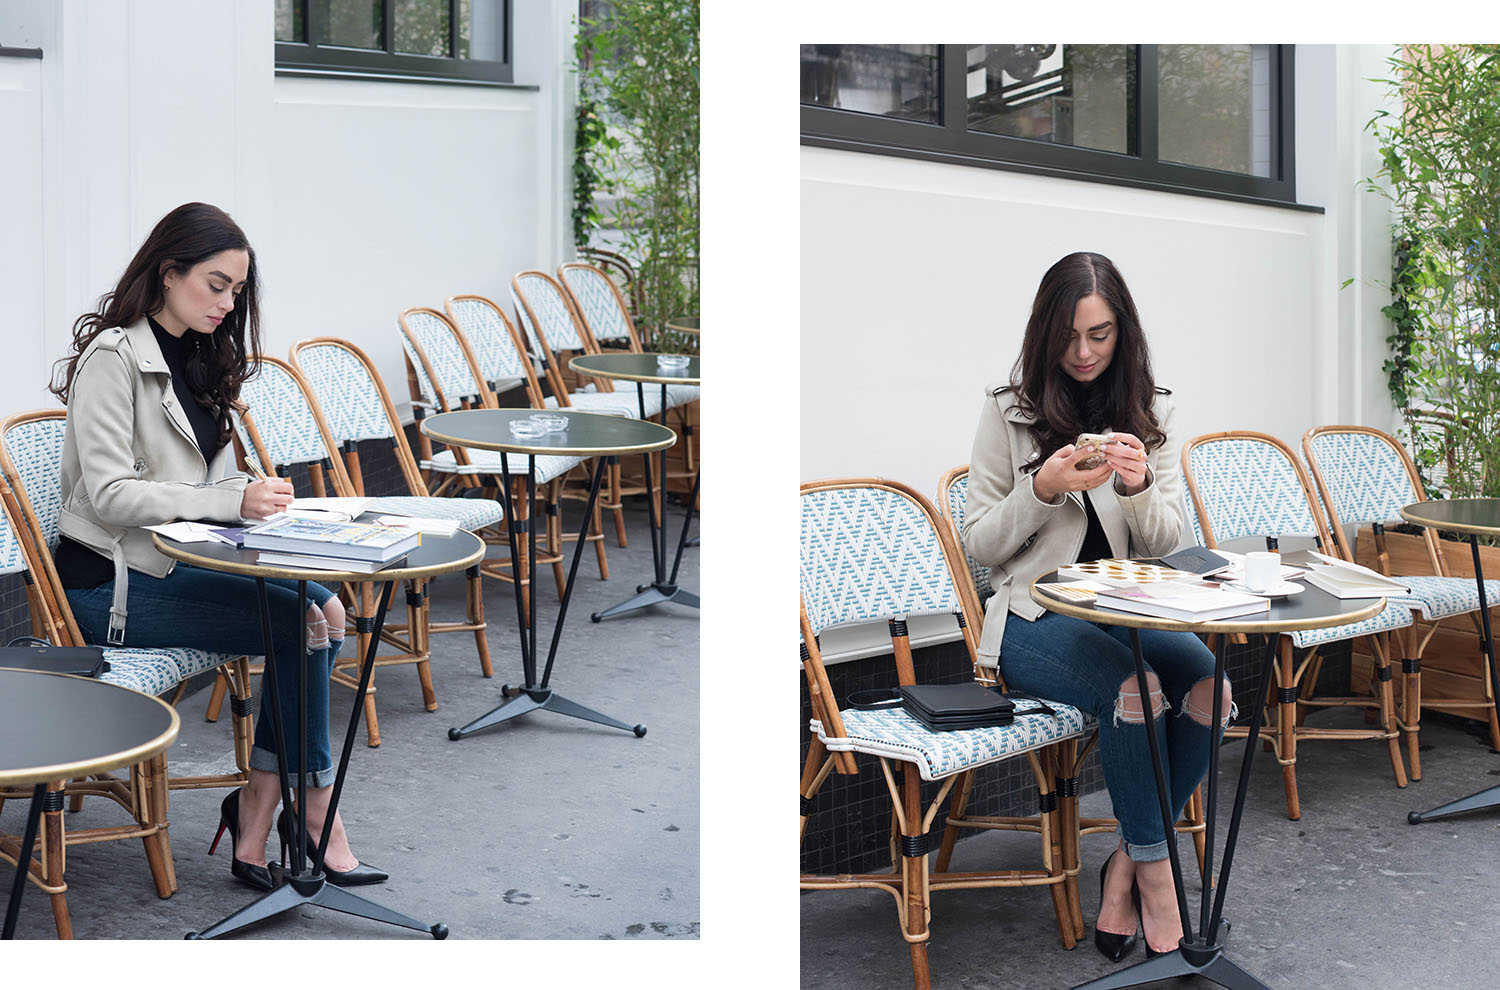 Fashion blogger Cee Fardoe of Coco & Vera works on the terrace at Cafe Maison Marie in Paris, wearing a Zara suede jacket and Christian Louboutin Pigalle pumps